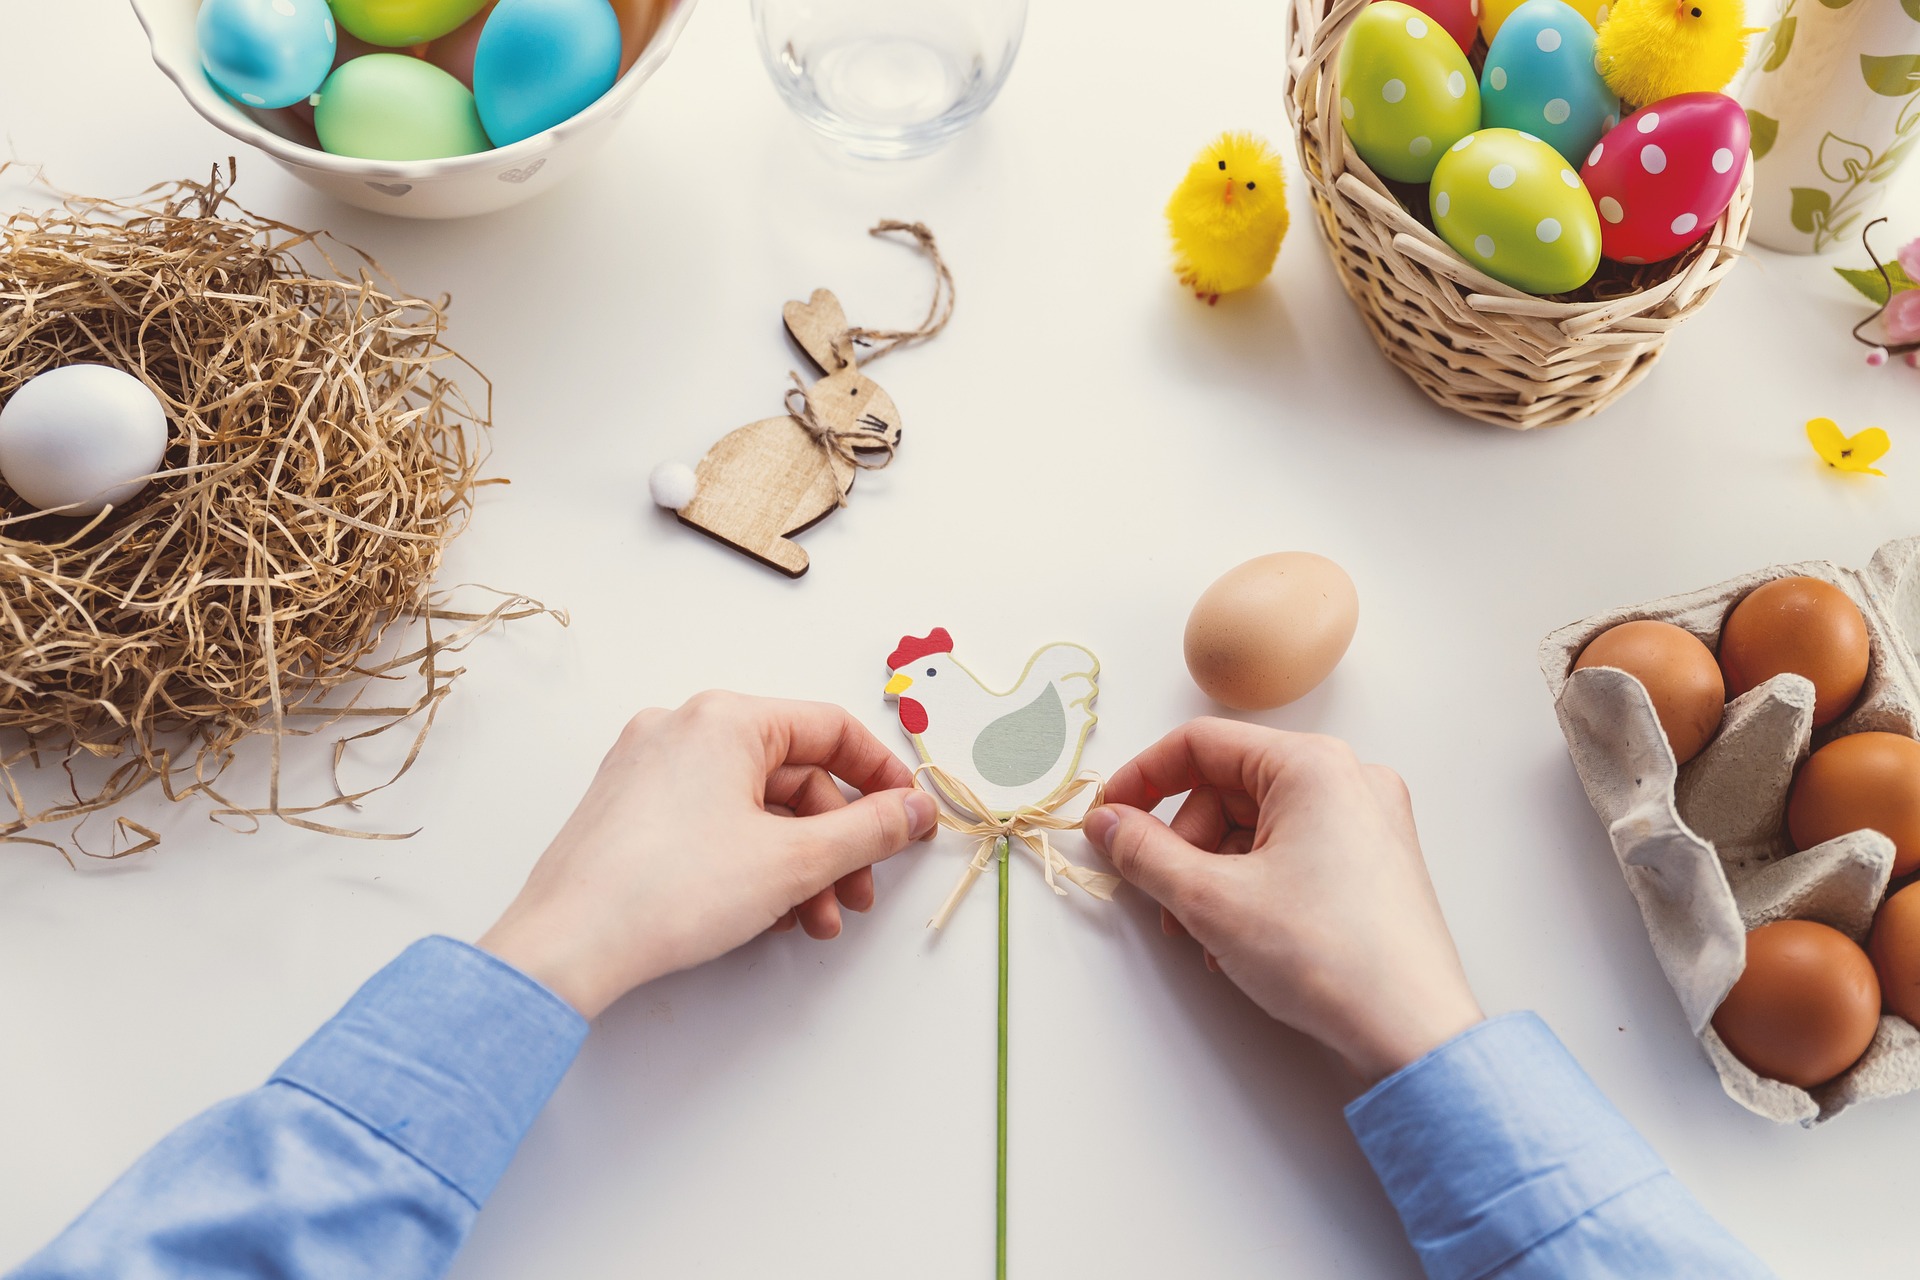 Course Image for 8040A2223 Family Fun:: Easter Crafts (Workshop)